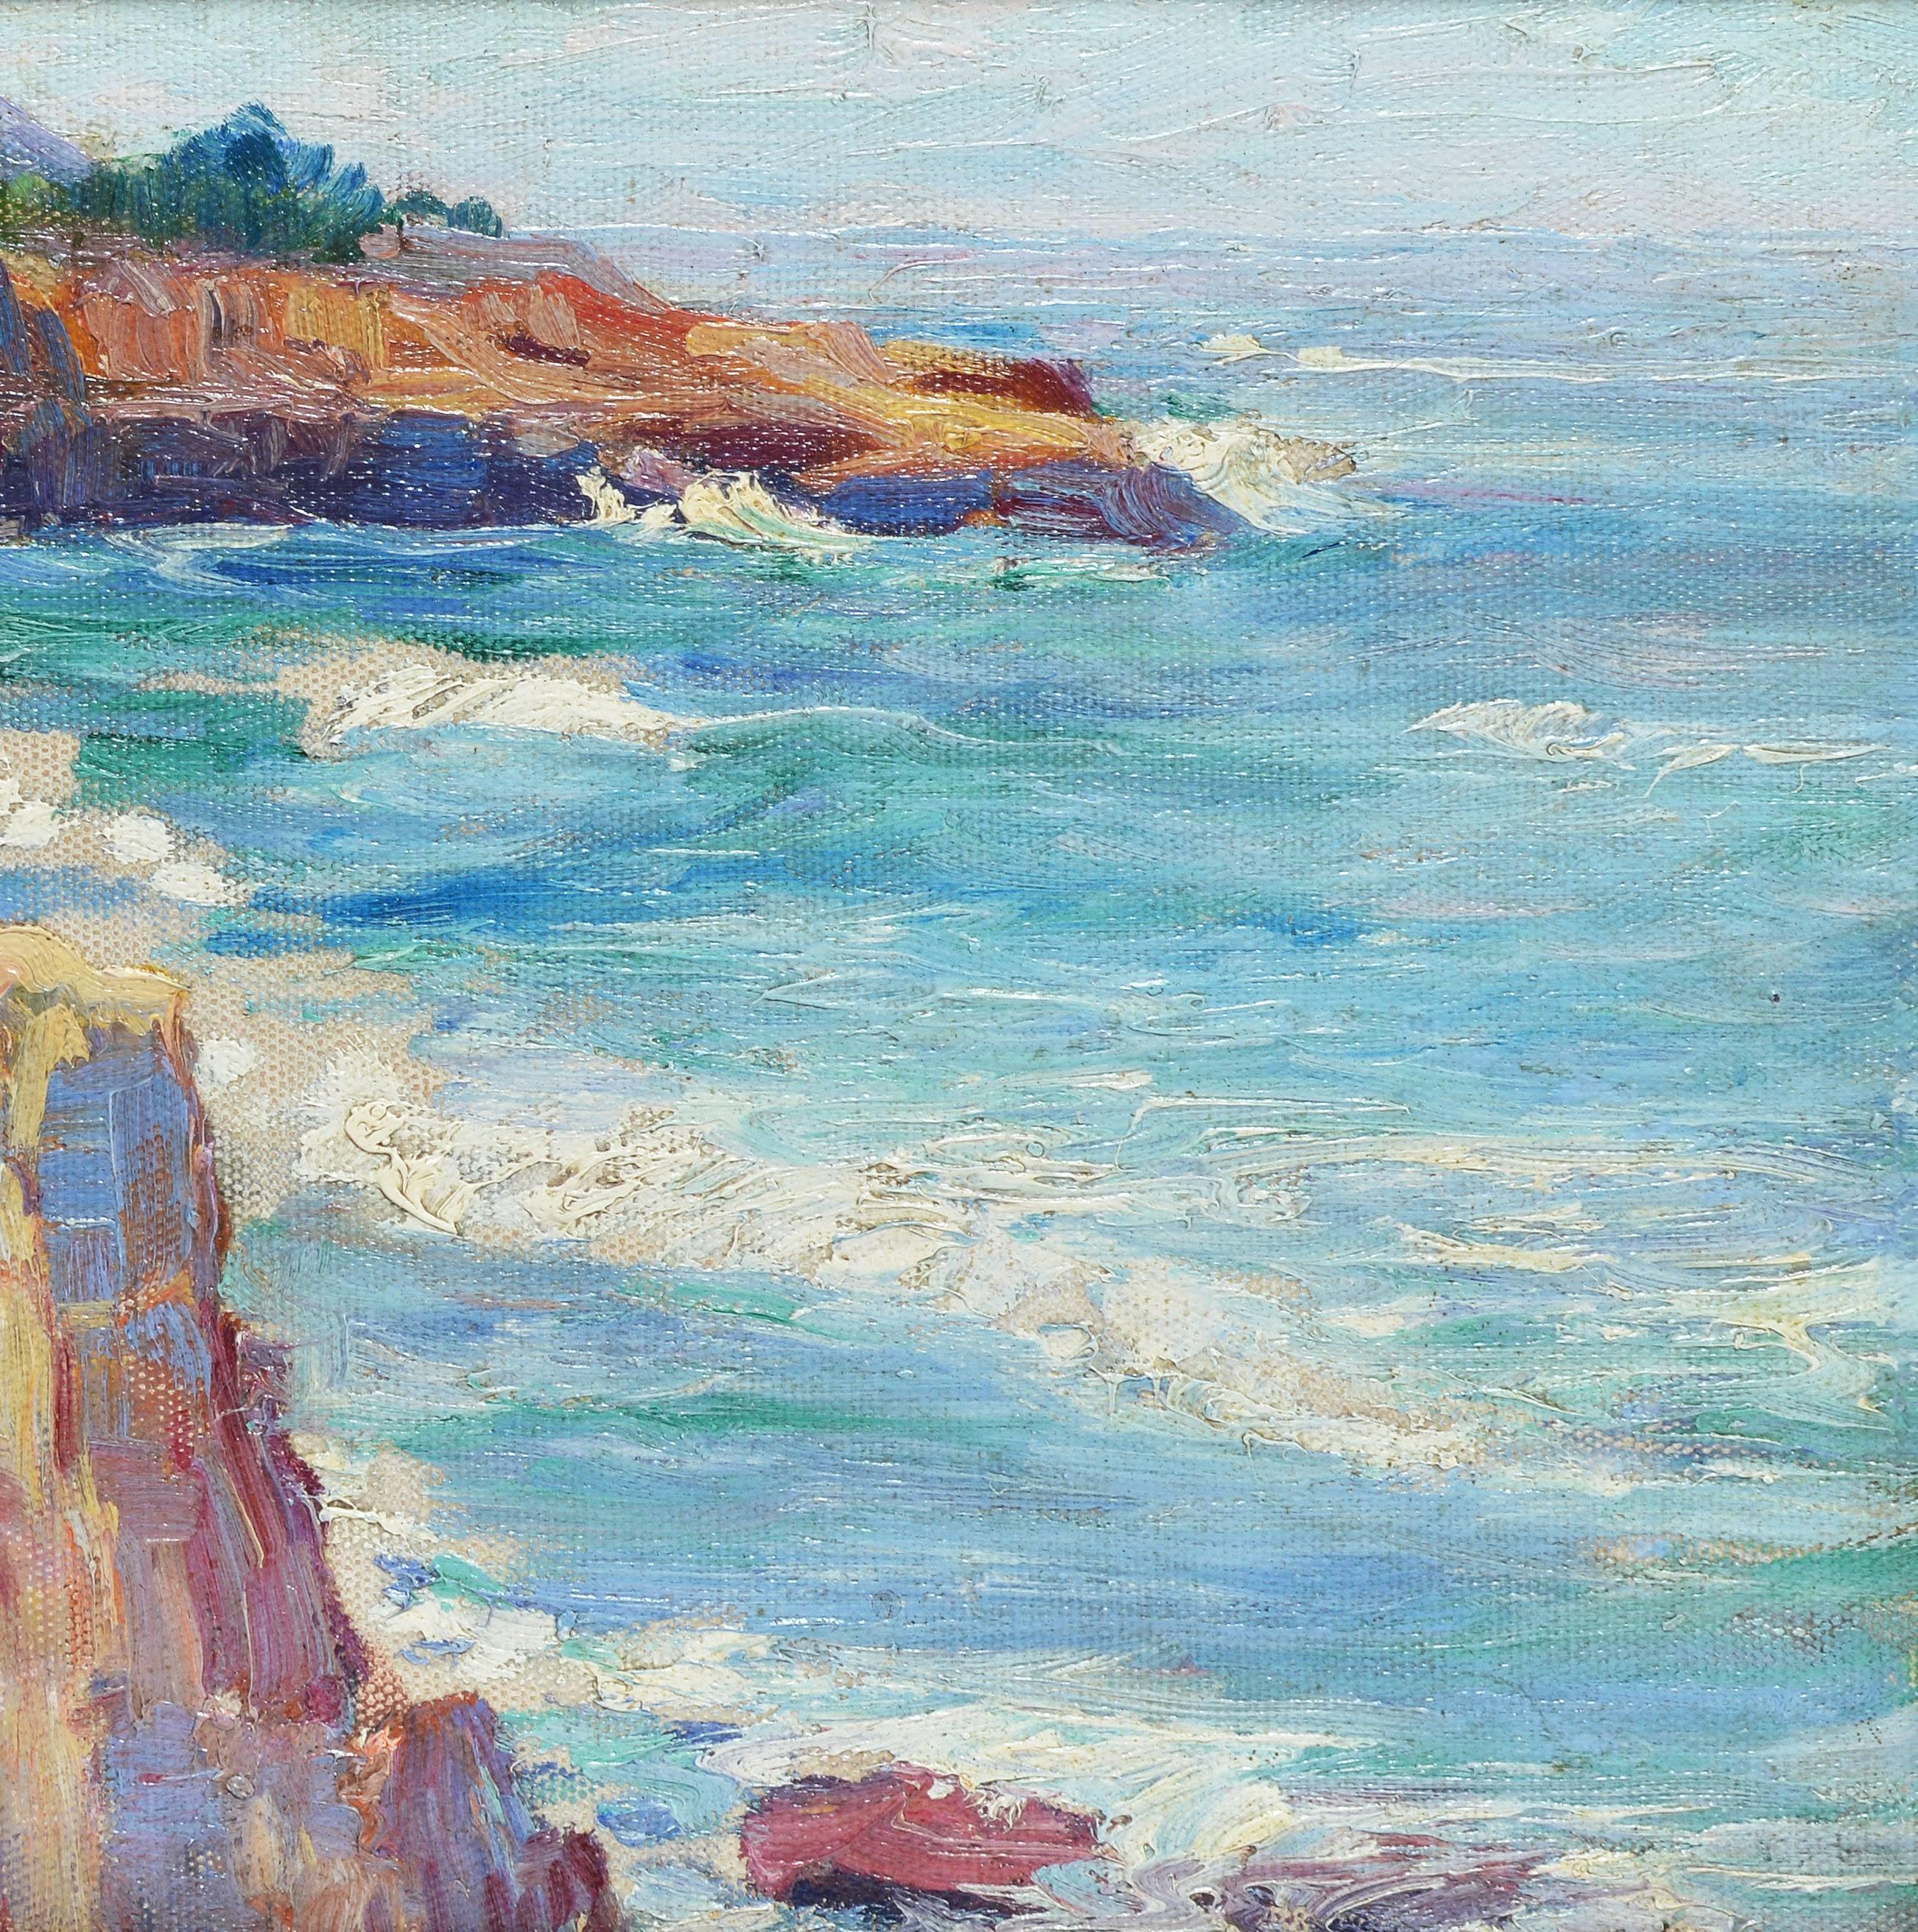 Crashing Waves at Point Loma Cliffs San Diego California - Gray Landscape Painting by Unknown